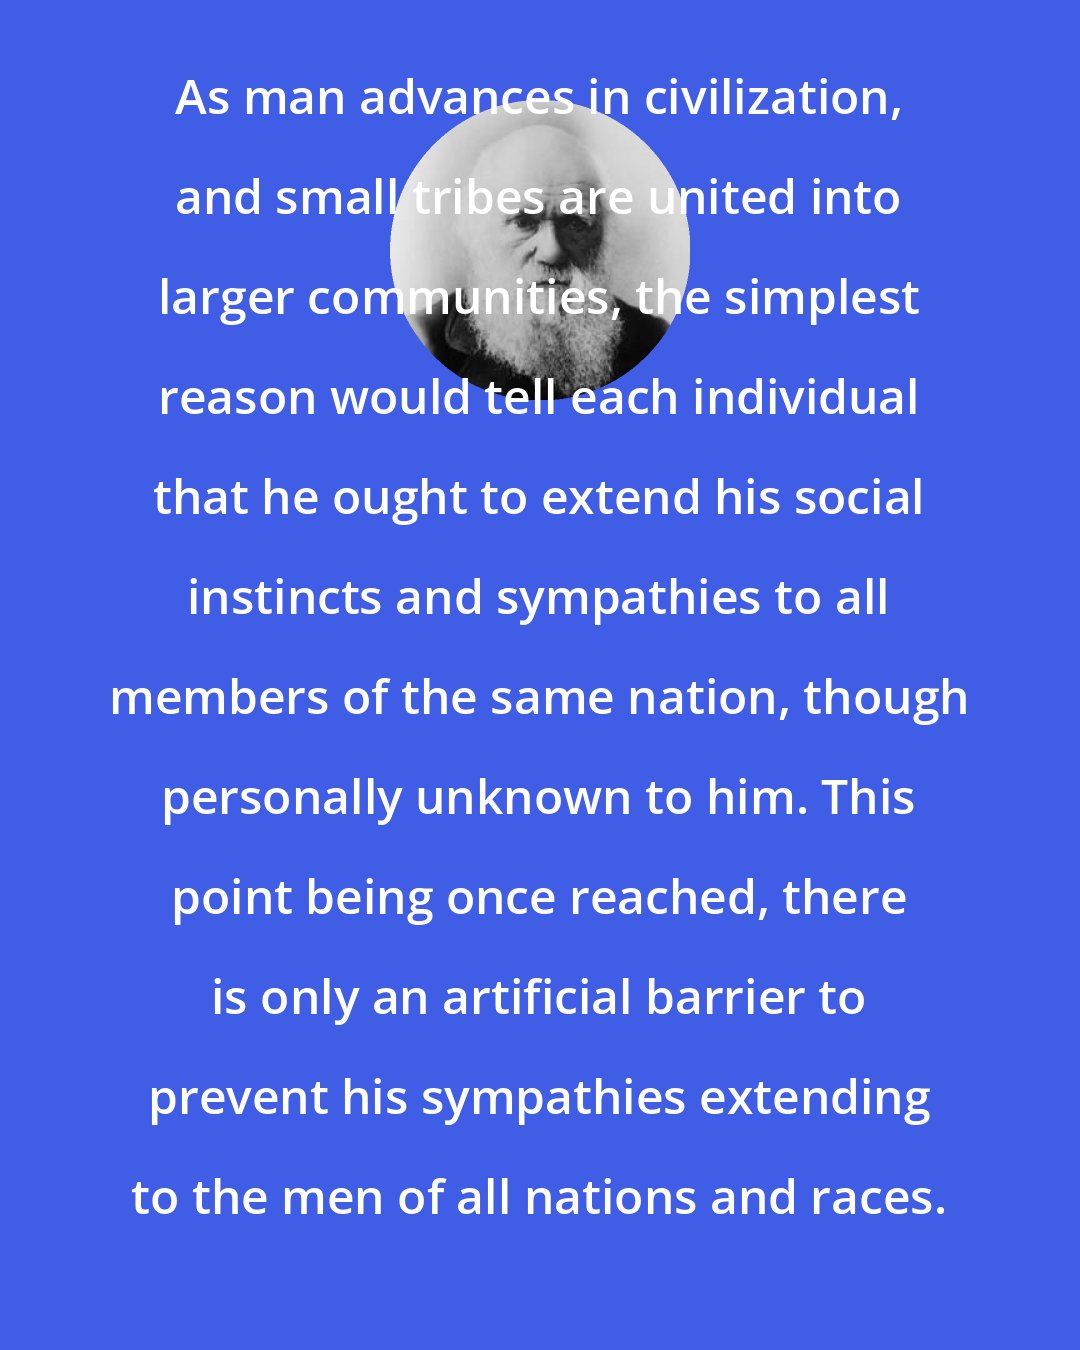 Charles Darwin: As man advances in civilization, and small tribes are united into larger communities, the simplest reason would tell each individual that he ought to extend his social instincts and sympathies to all members of the same nation, though personally unknown to him. This point being once reached, there is only an artificial barrier to prevent his sympathies extending to the men of all nations and races.